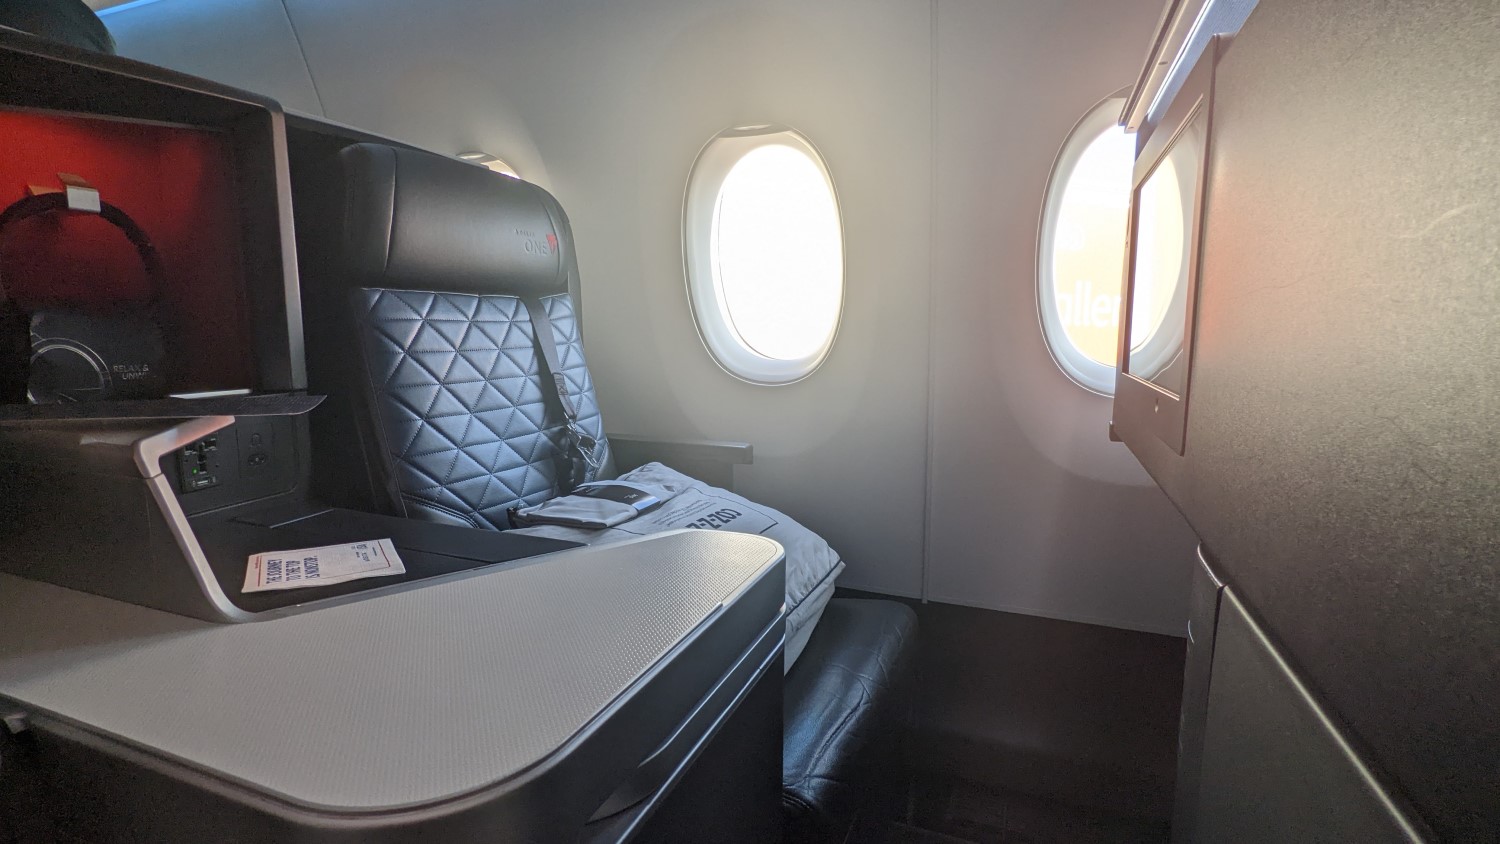 51 Great Ways To Use Bilt Rewards Points for Business Class